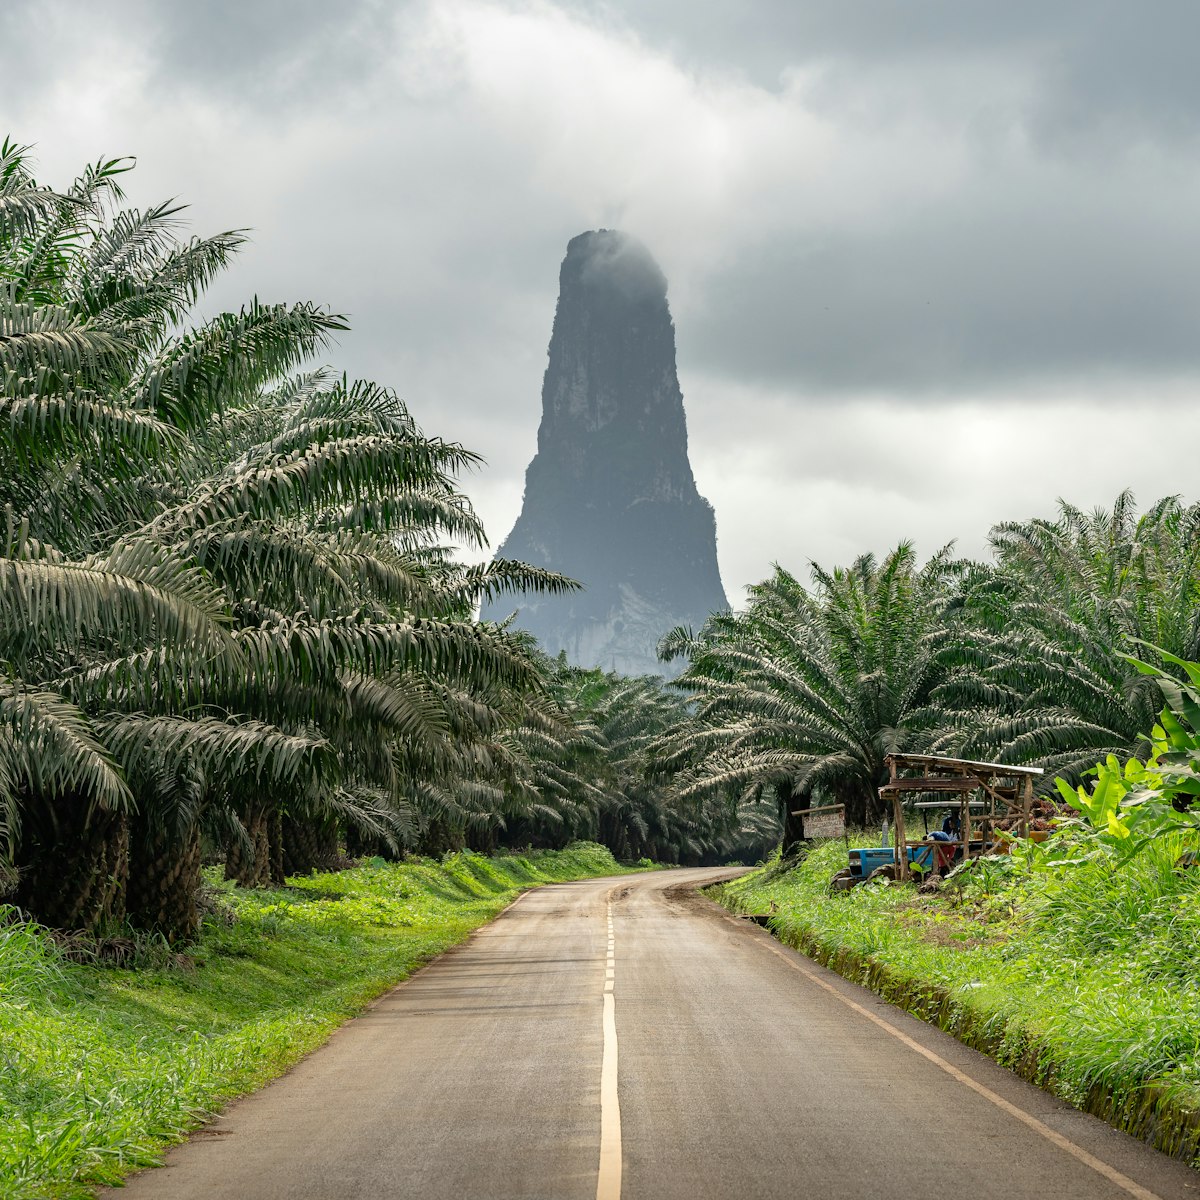 Pico Cão Grande in Sao Tome and Principe, nature landscape. Travel to Sao Tome and Principe. Beautiful paradise island in Gulf of Guinea. Former colony of Portugal.; Shutterstock ID 1193588719; purchase_order: 65050; job: ; client: ; other:
1193588719